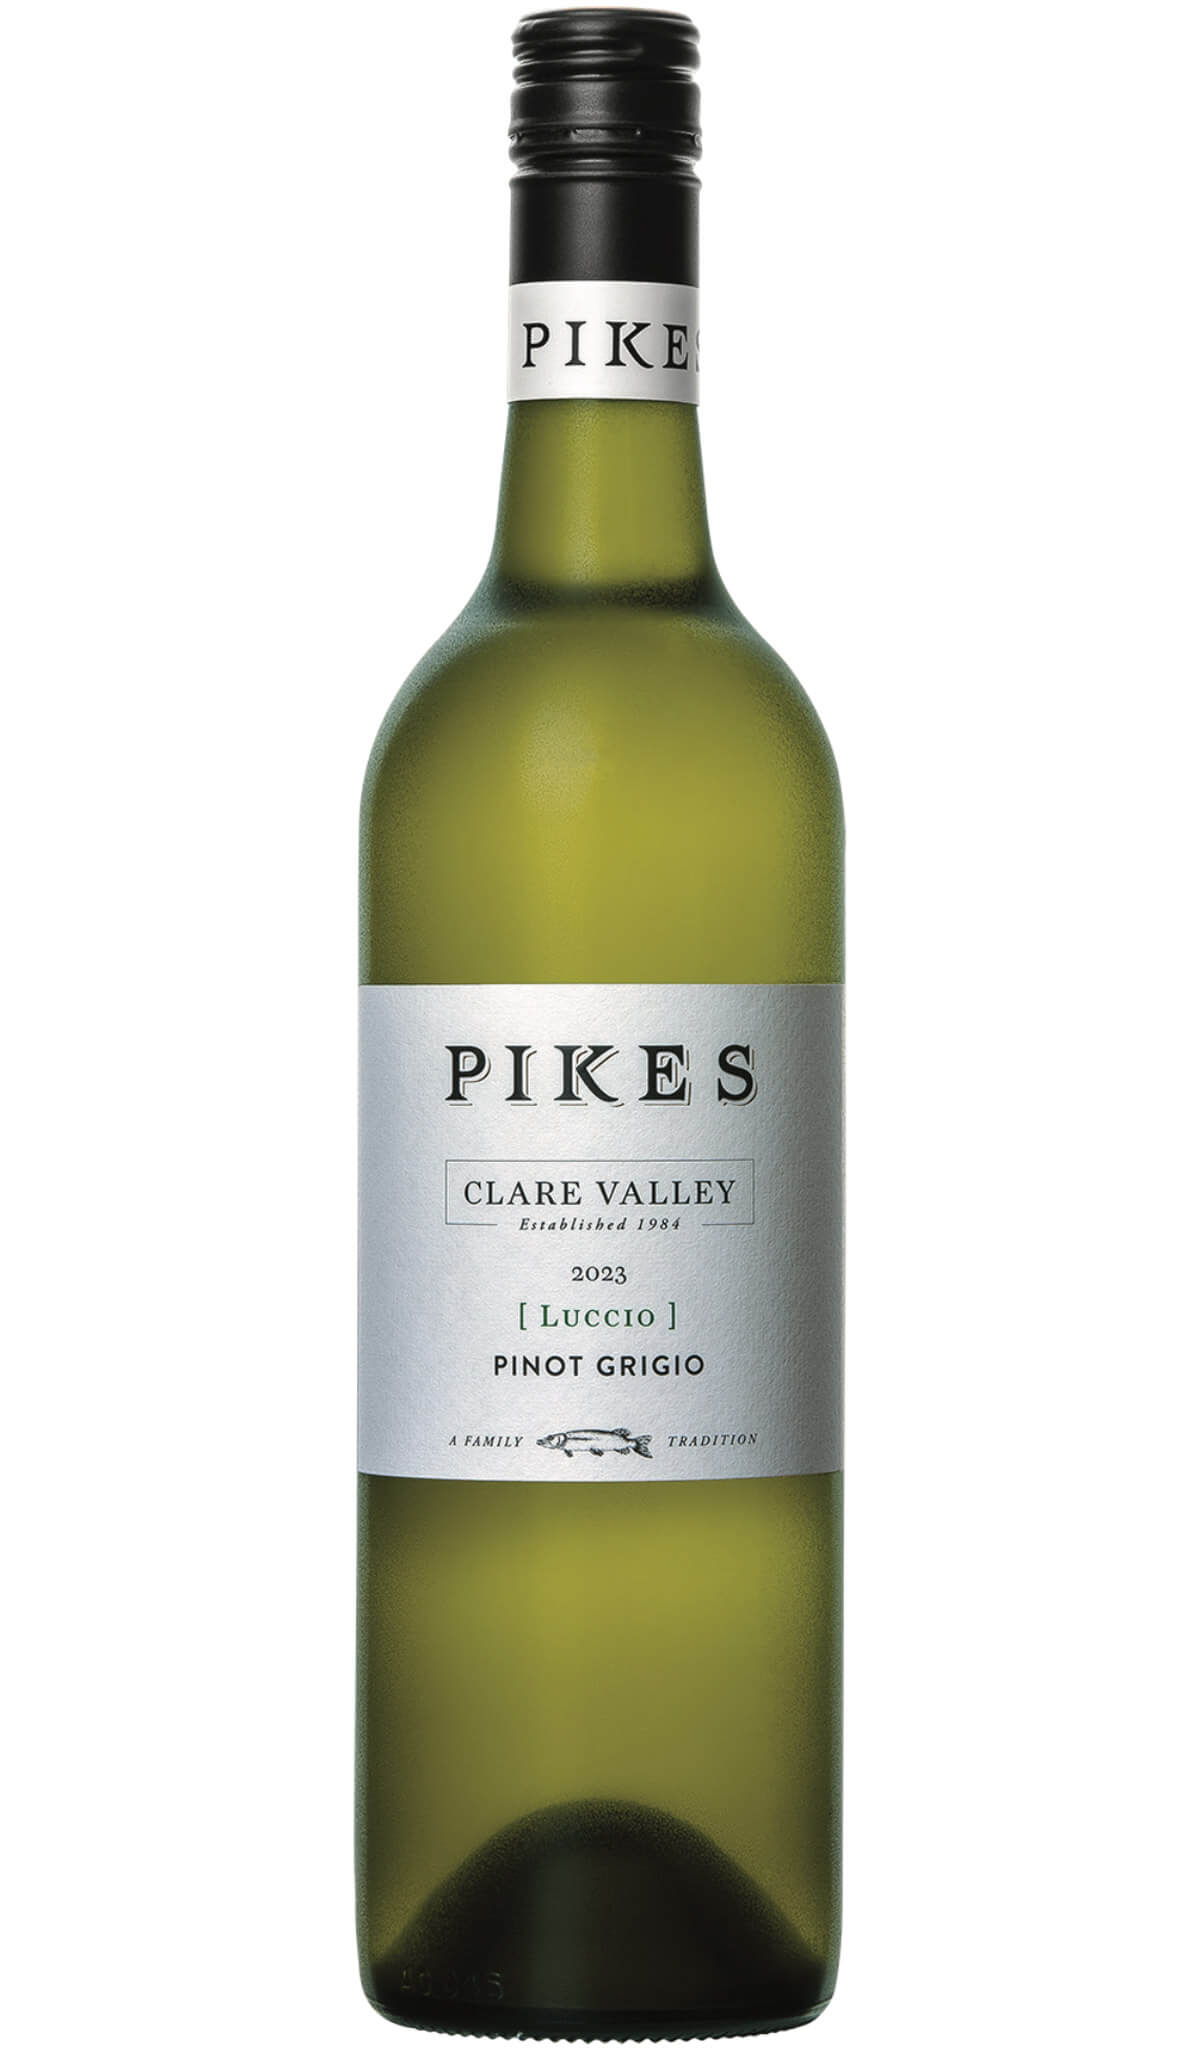 Find out more, explore the range or purchase Pikes Luccio Pinot Grigio 2023 (Clare Valley) available online at Wine Sellers Direct - Australia's independent liquor specialists.